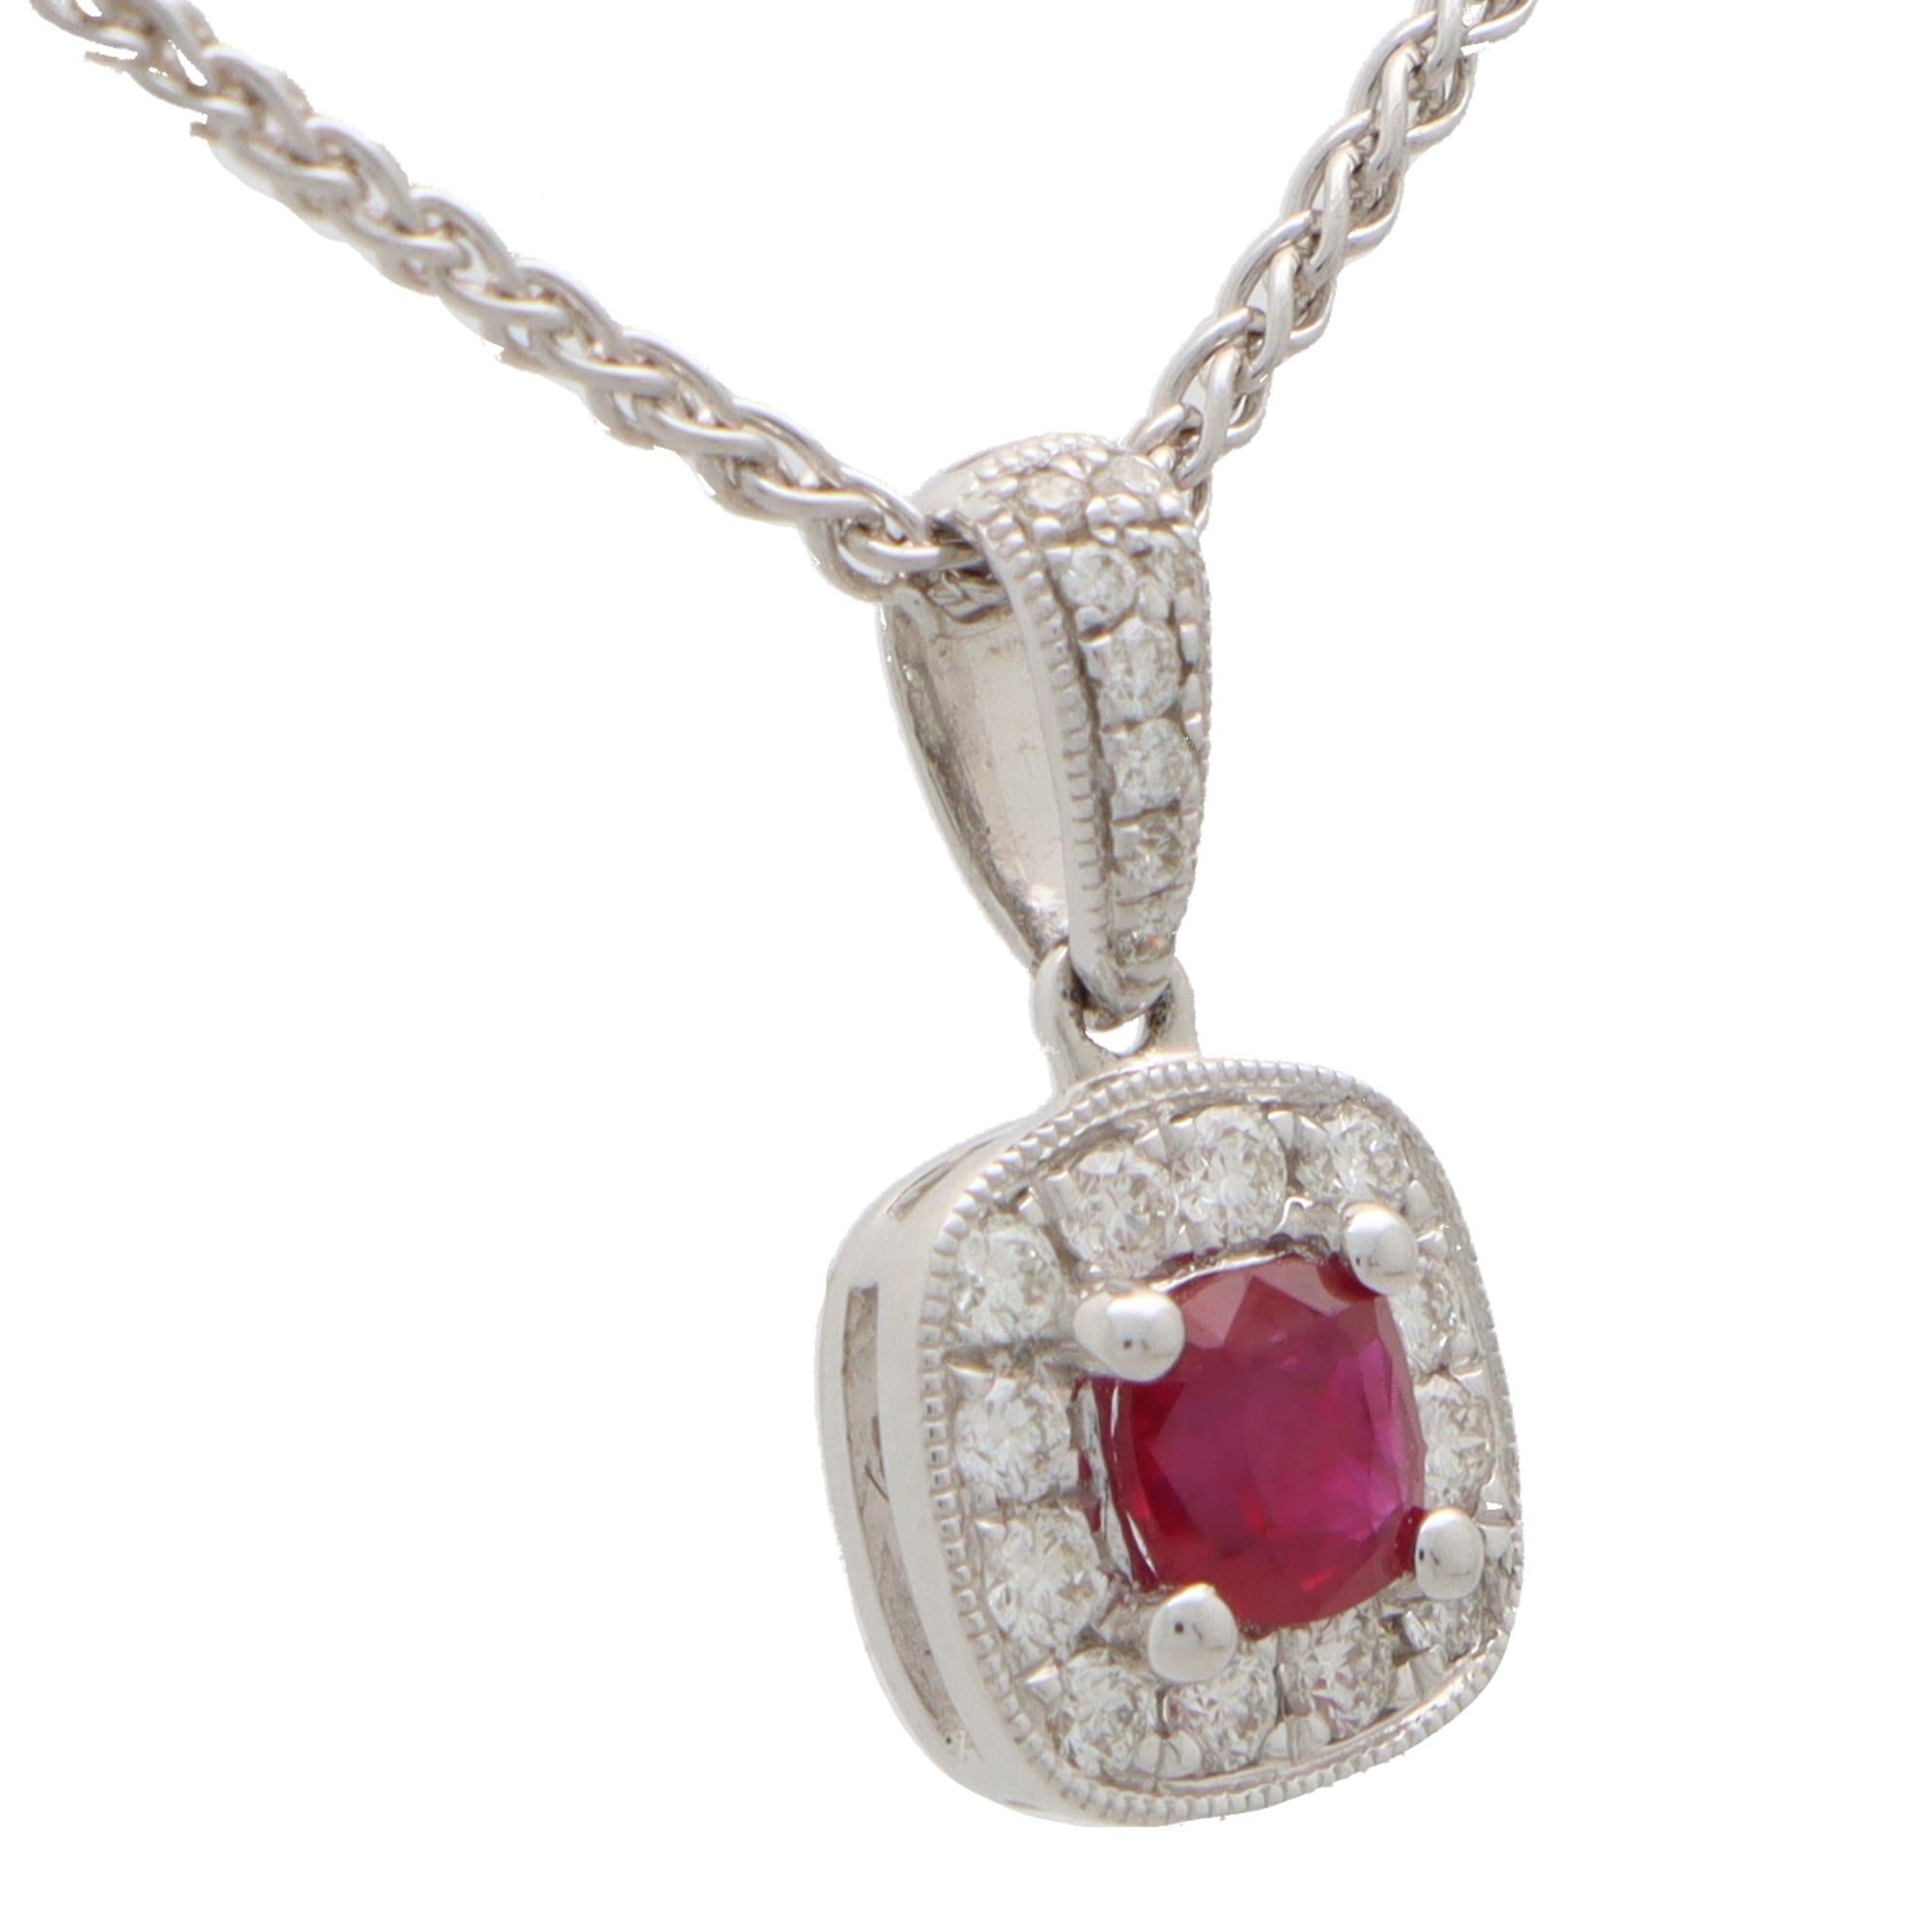 A beautiful cushion cut ruby and diamond cluster pendant set in 18k white gold.

The pendant is centrally set with a beautiful coloured red cushion cut ruby which is surrounded by 12 sparkly round brilliant cut diamonds. The pendant hangs from a